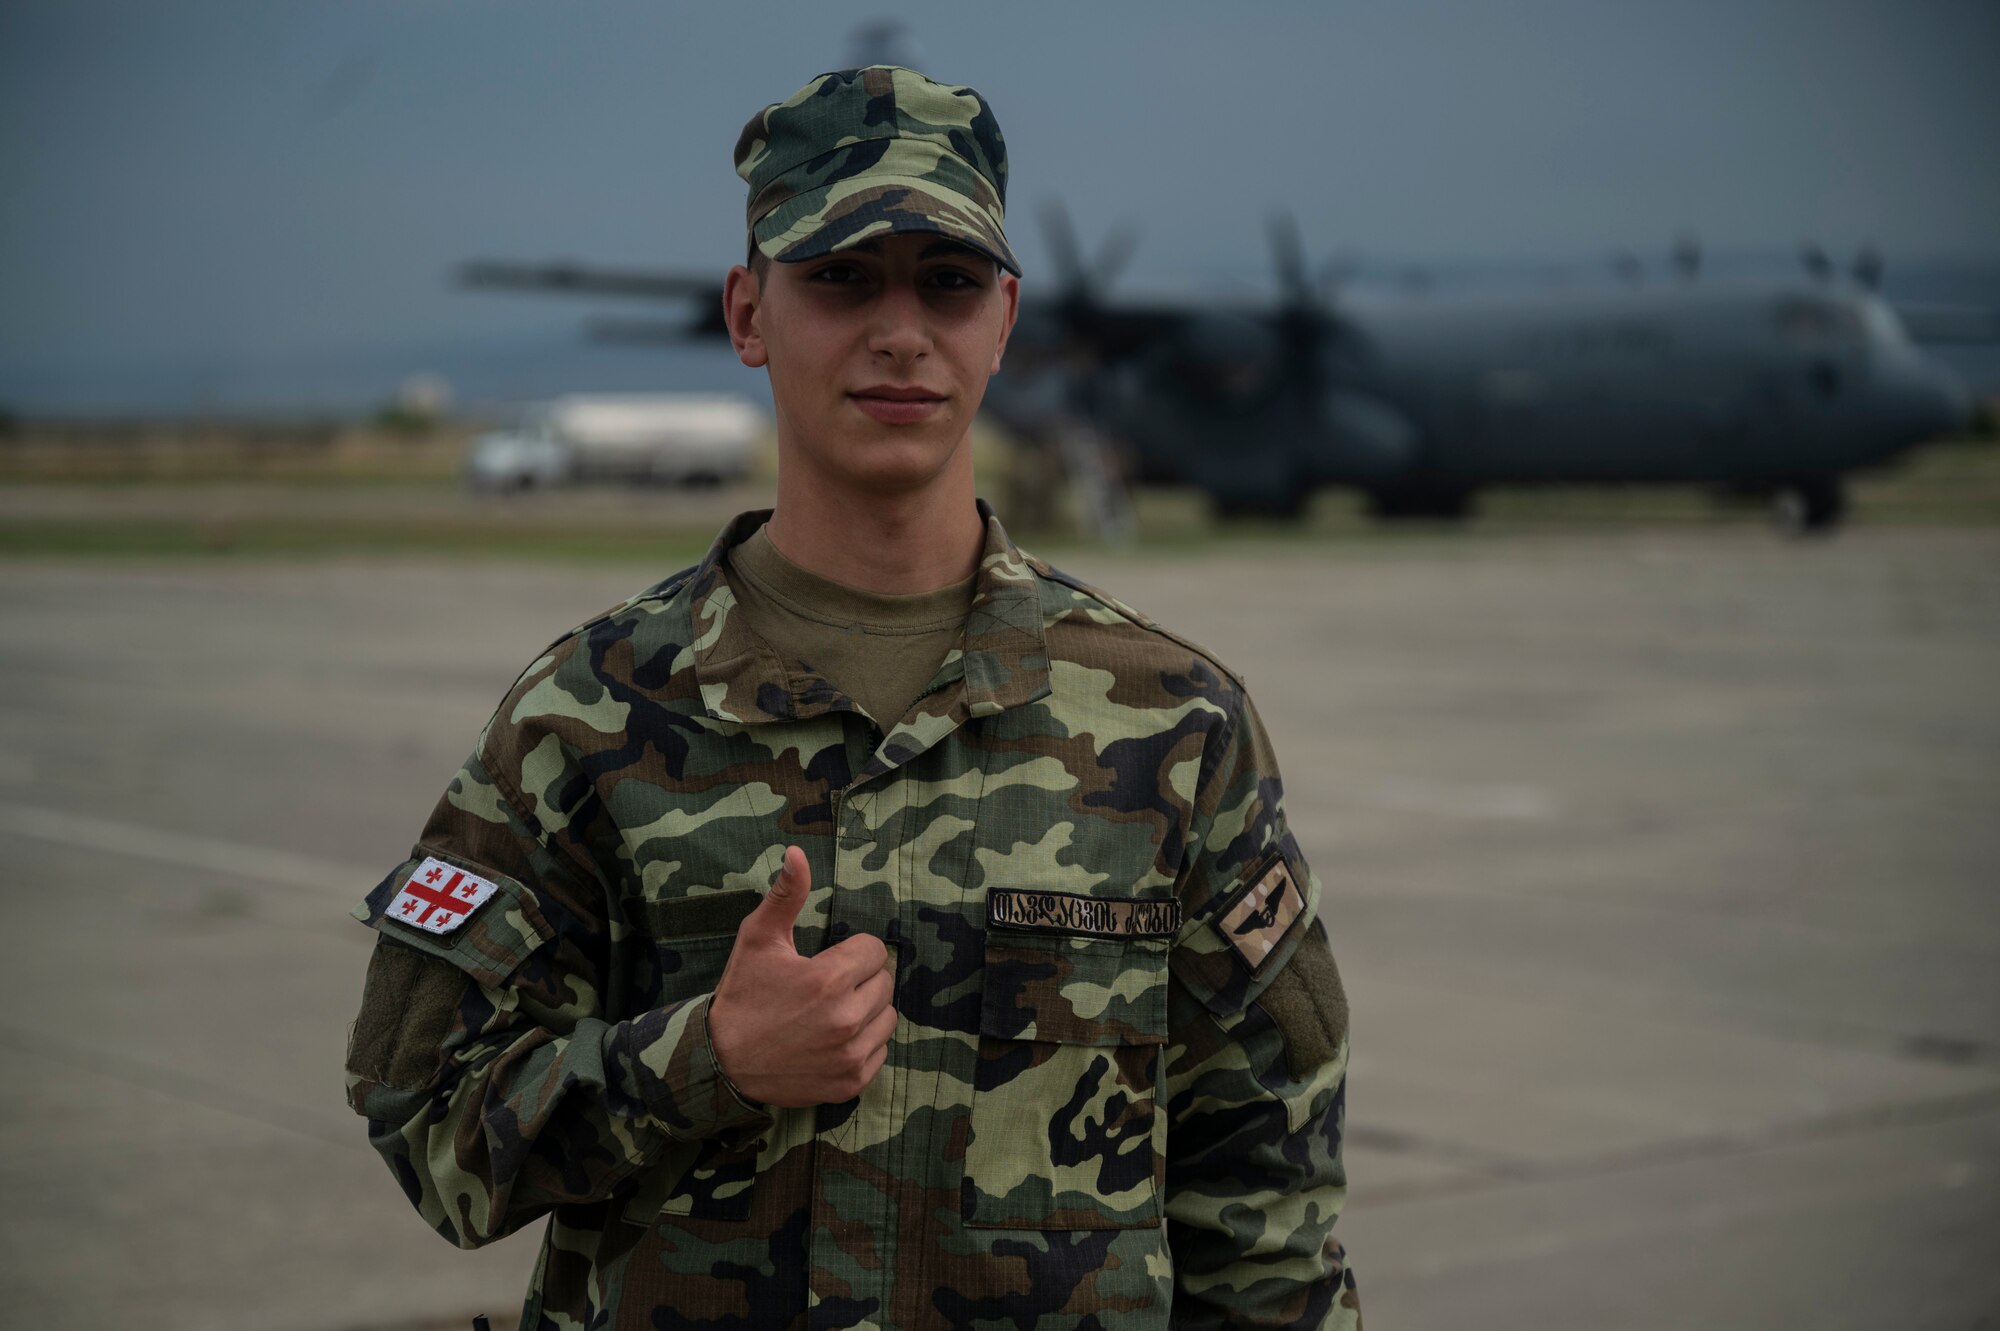 Georgian army Pvt. George Miroiani, stands guard at the flightline during exercise Agile Spirit 21